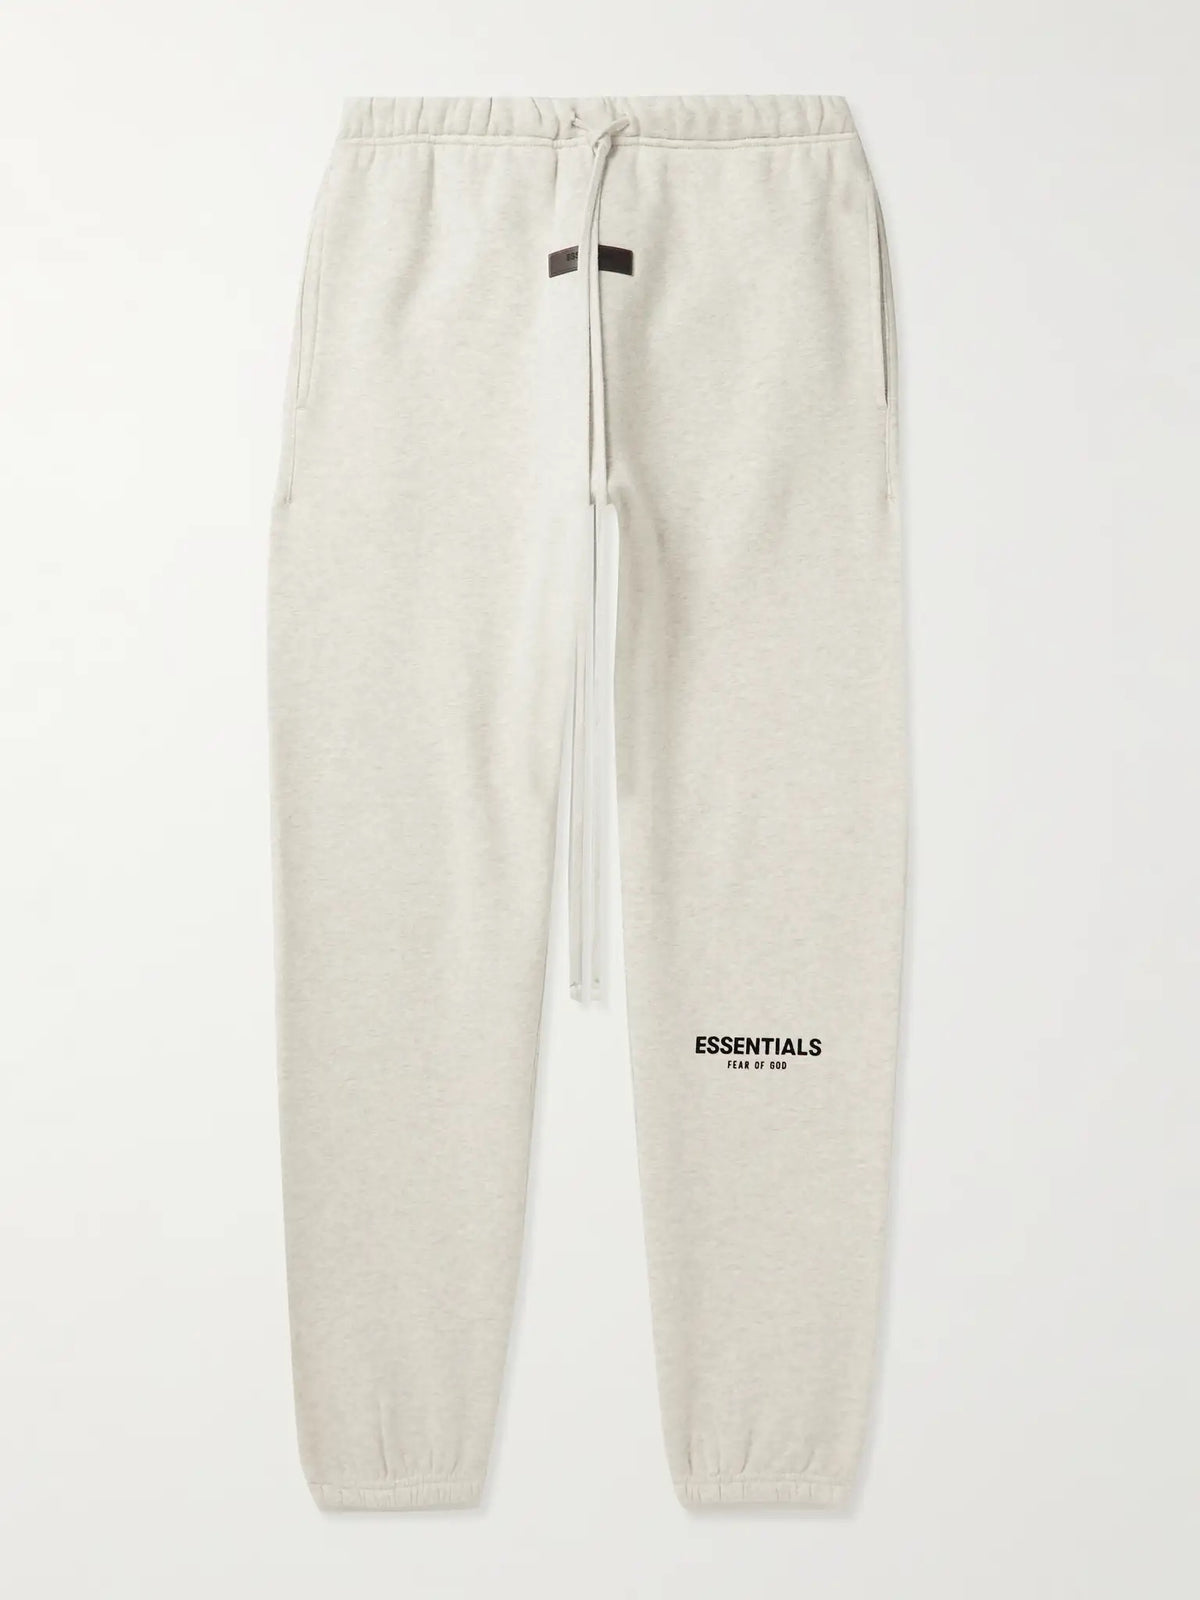 Fear Of God Essentials Tracksuit SS22 “Light Oatmeal”